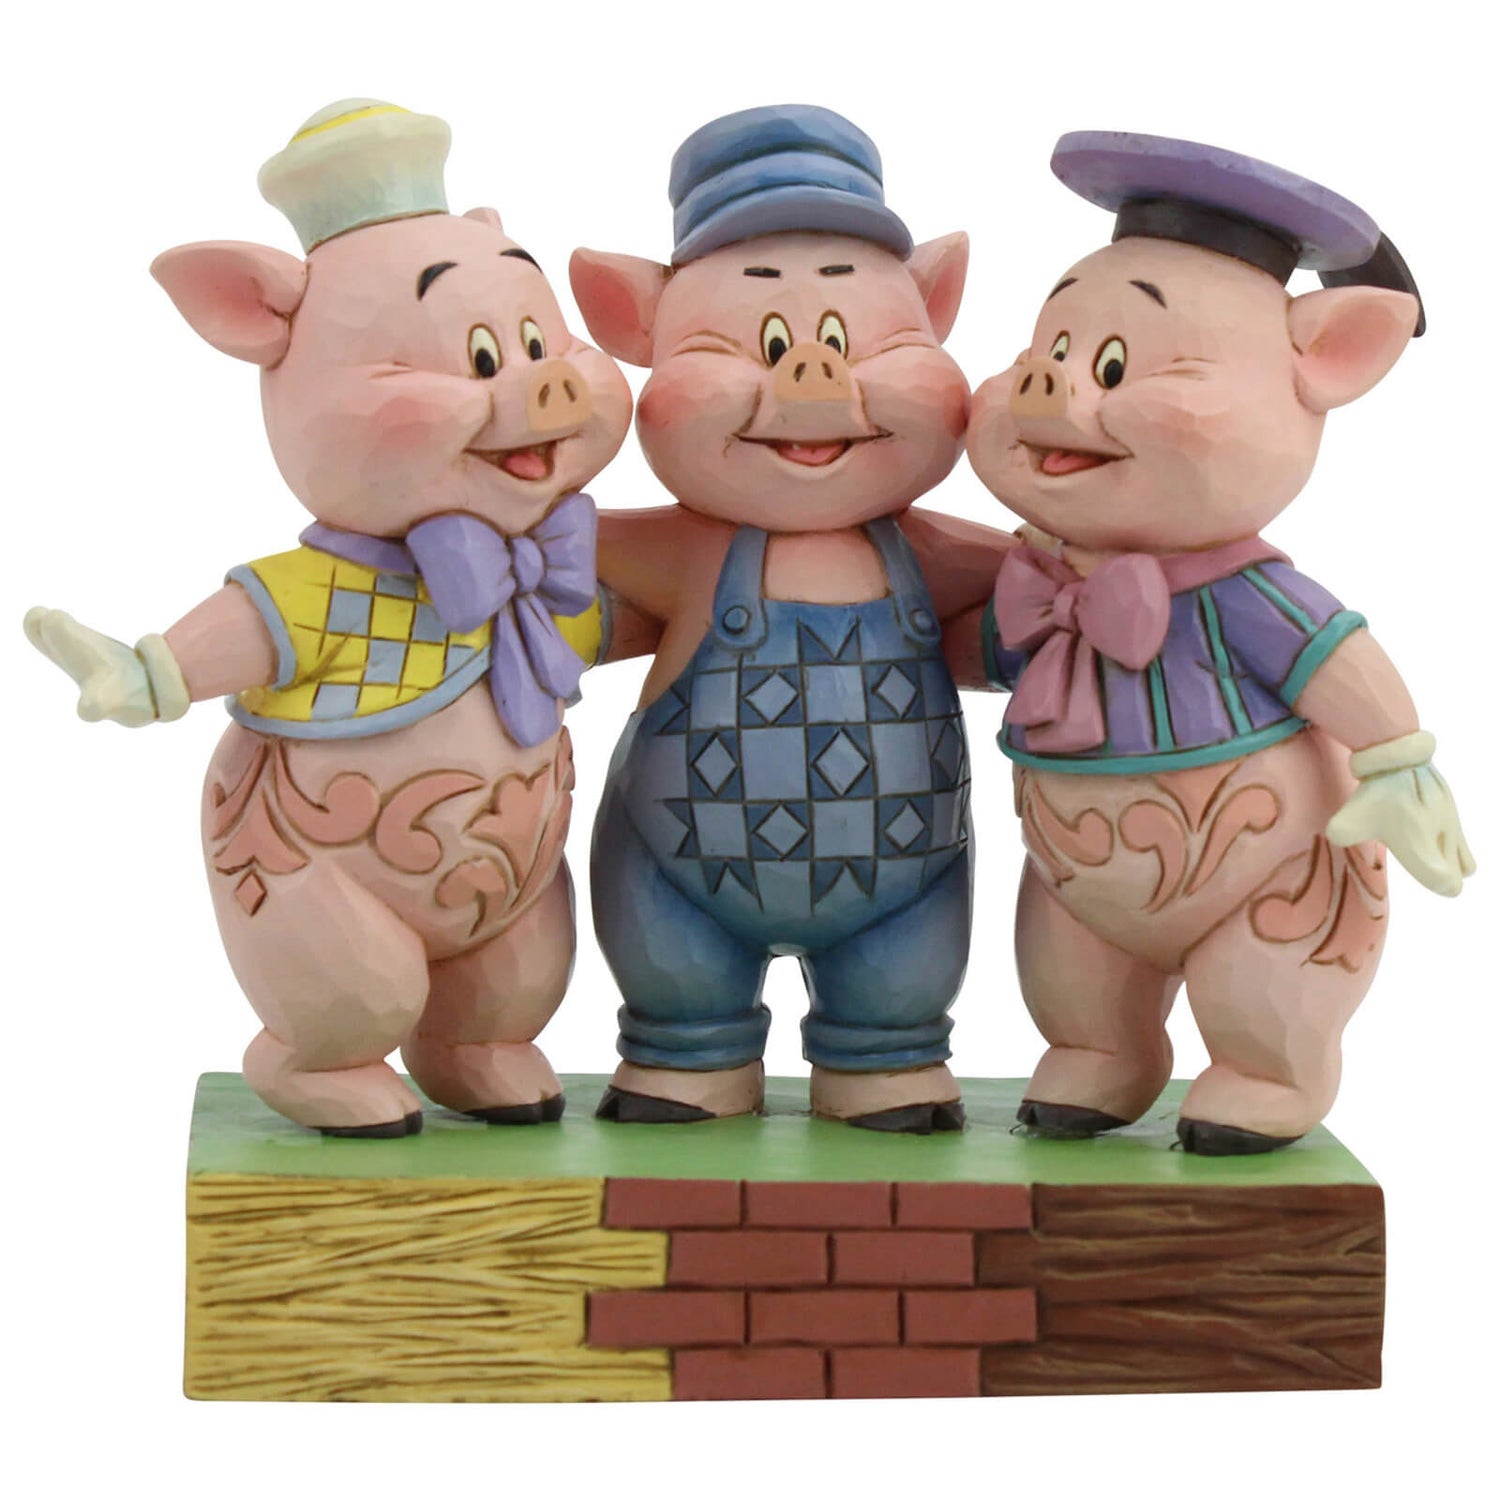 Disney Traditions - Squealing Siblings (Silly Symphony Three Little Pigs Figurine)